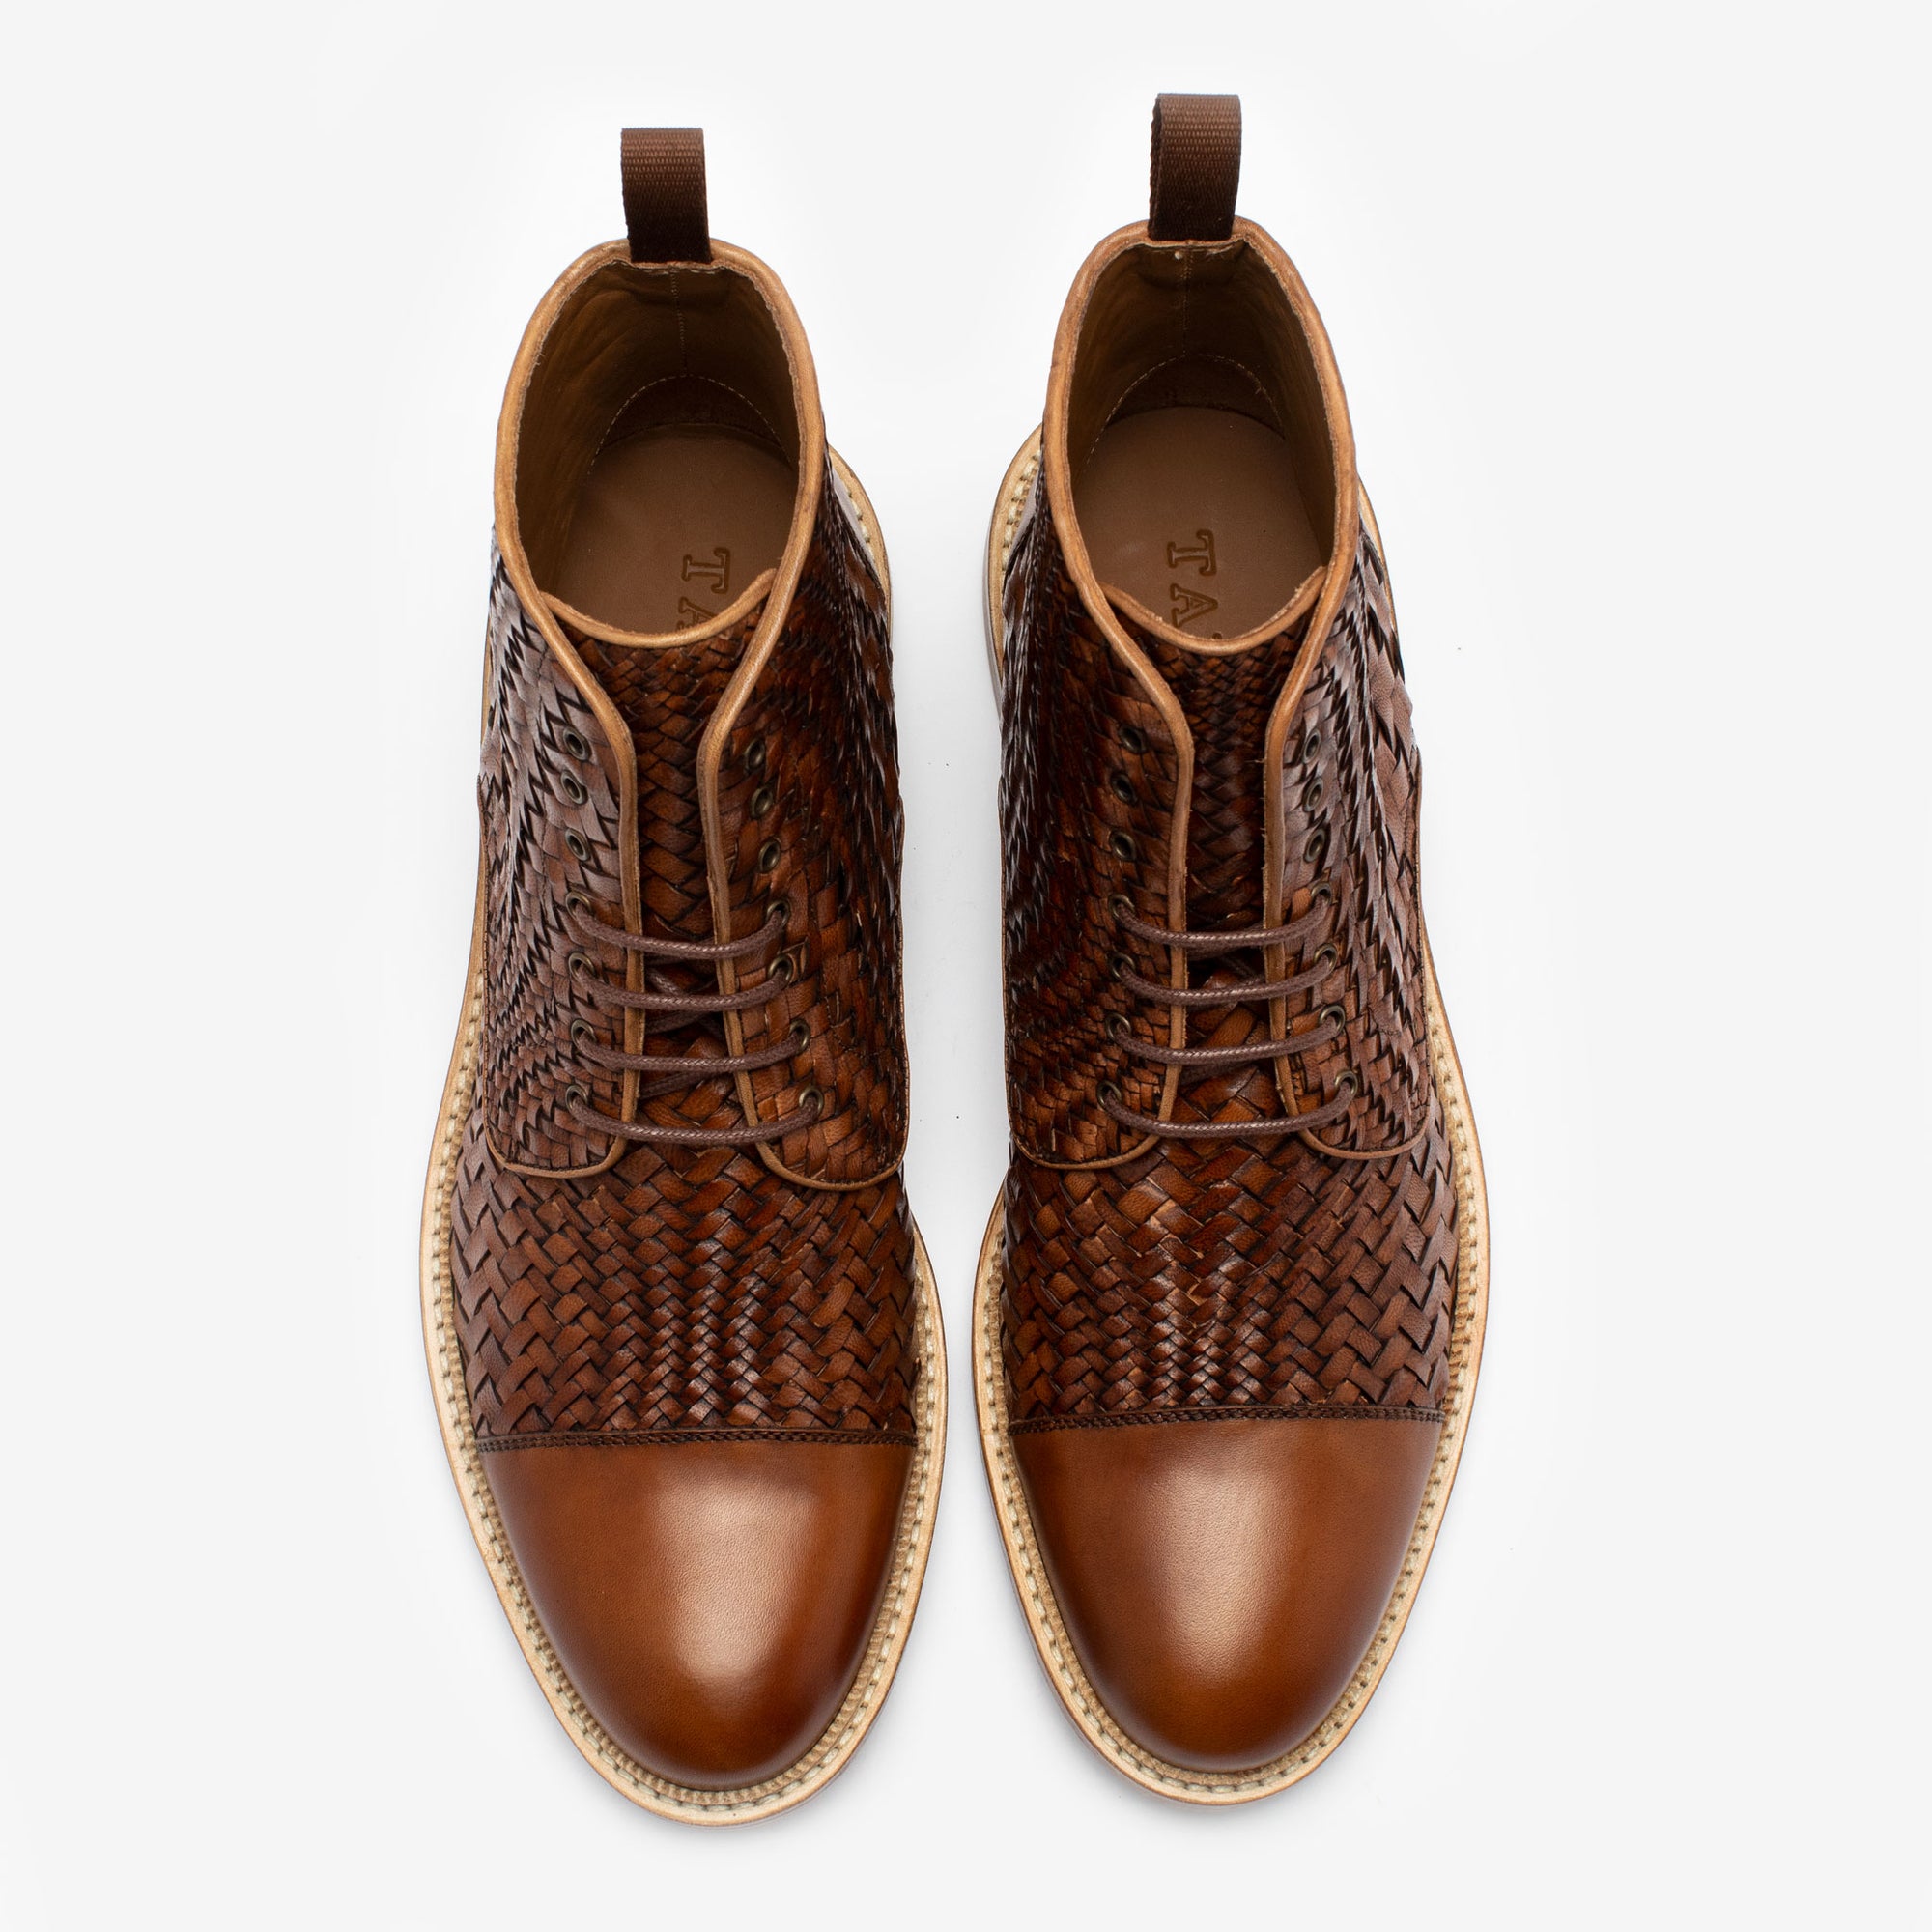 The Rome Boot in Woven